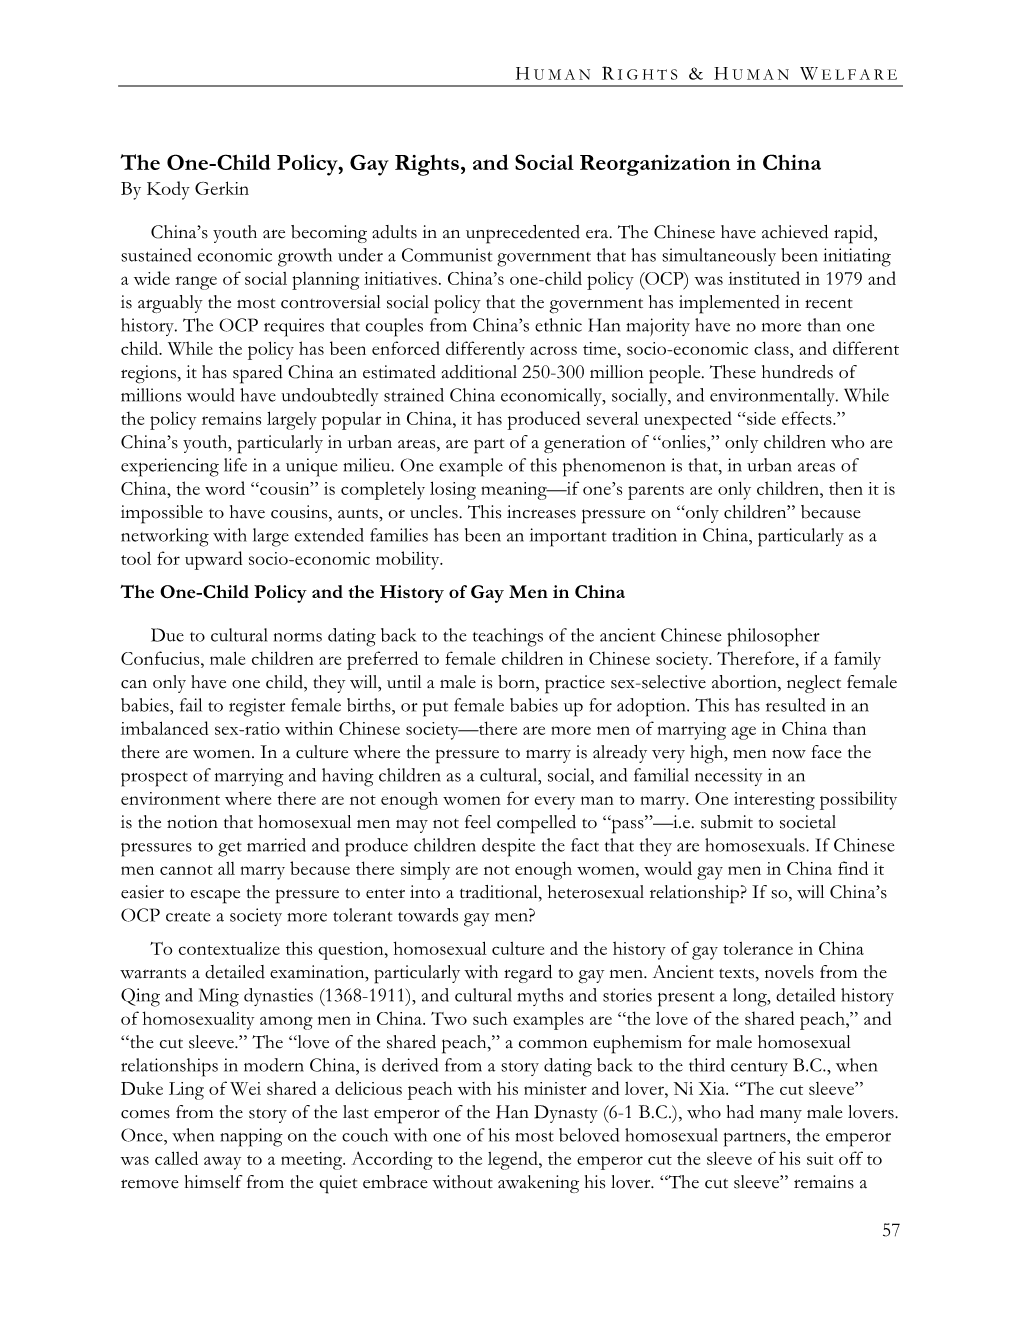 The One-Child Policy, Gay Rights, and Social Reorganization in China by Kody Gerkin